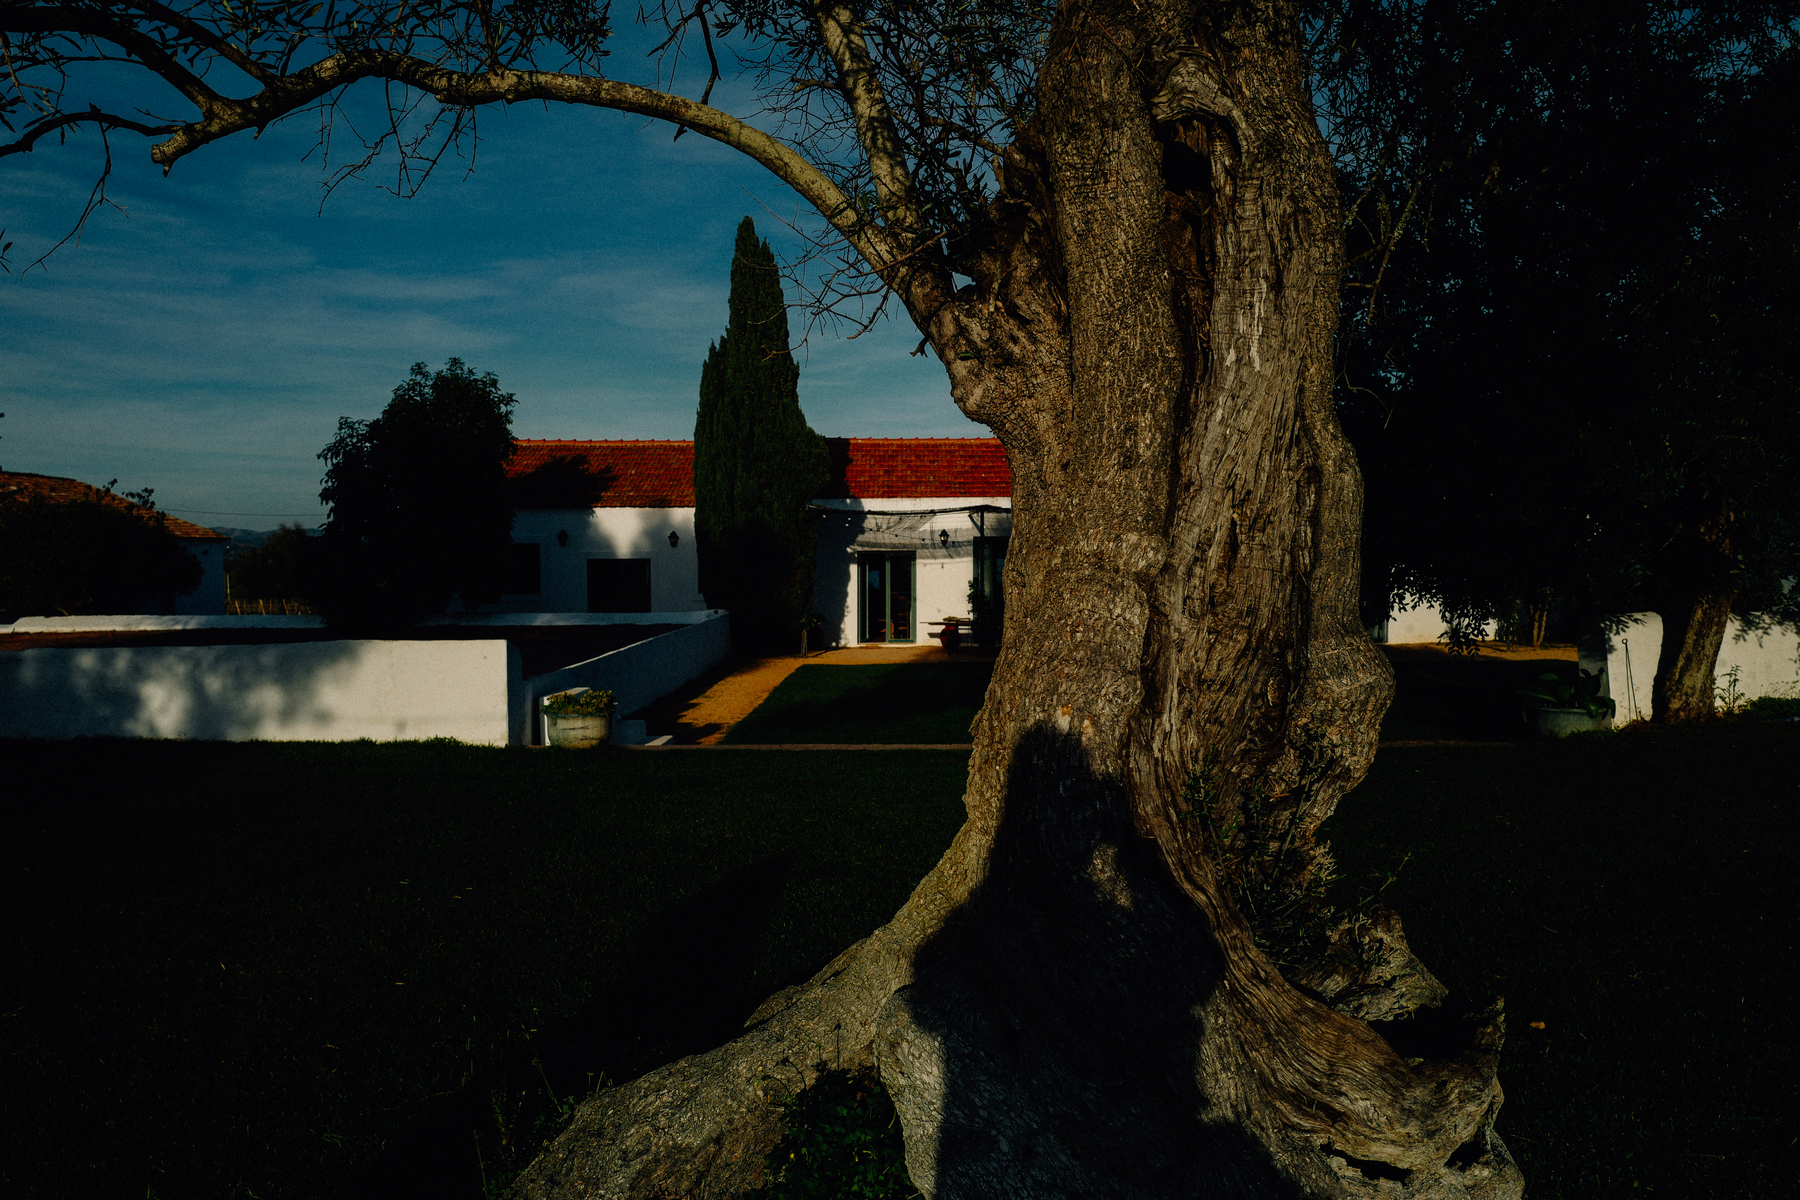 An old tree with a gnarled trunk in the foreground, with a white building with a red roof and a tall cypress tree in the background, set against a clear blue sky.